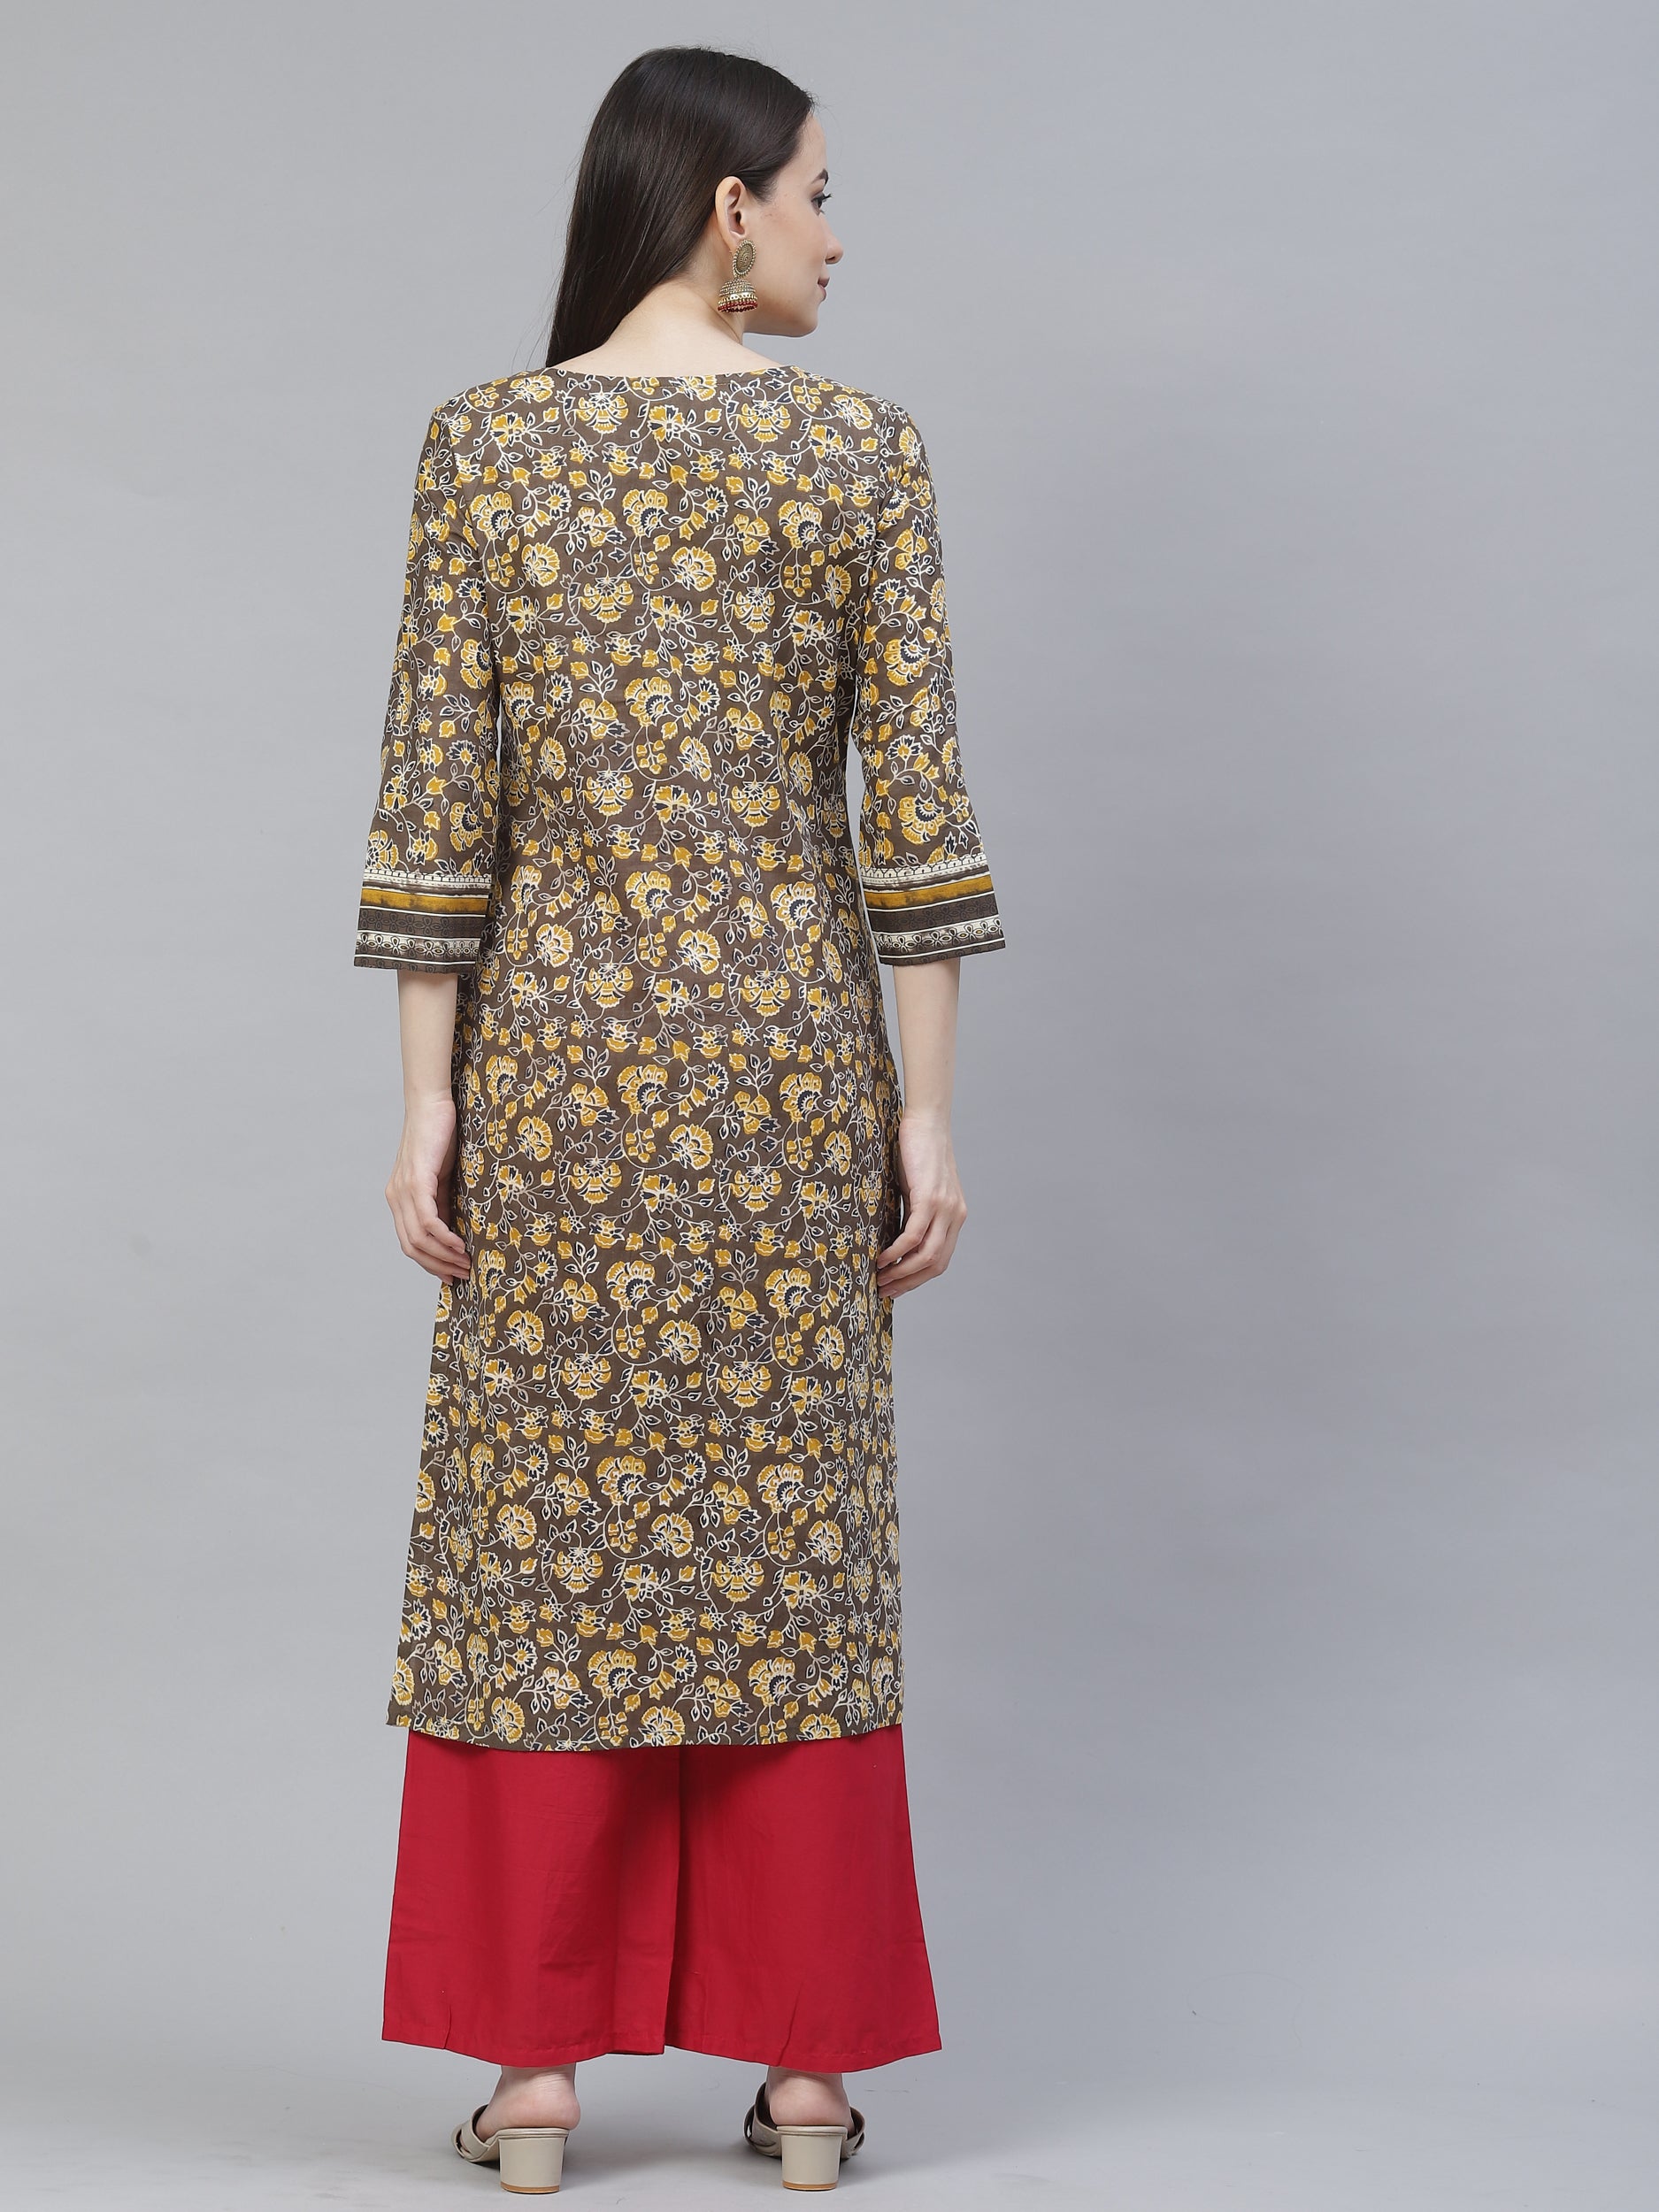 Women's green & yellow floral printed straight kurta with trousers - Meeranshi